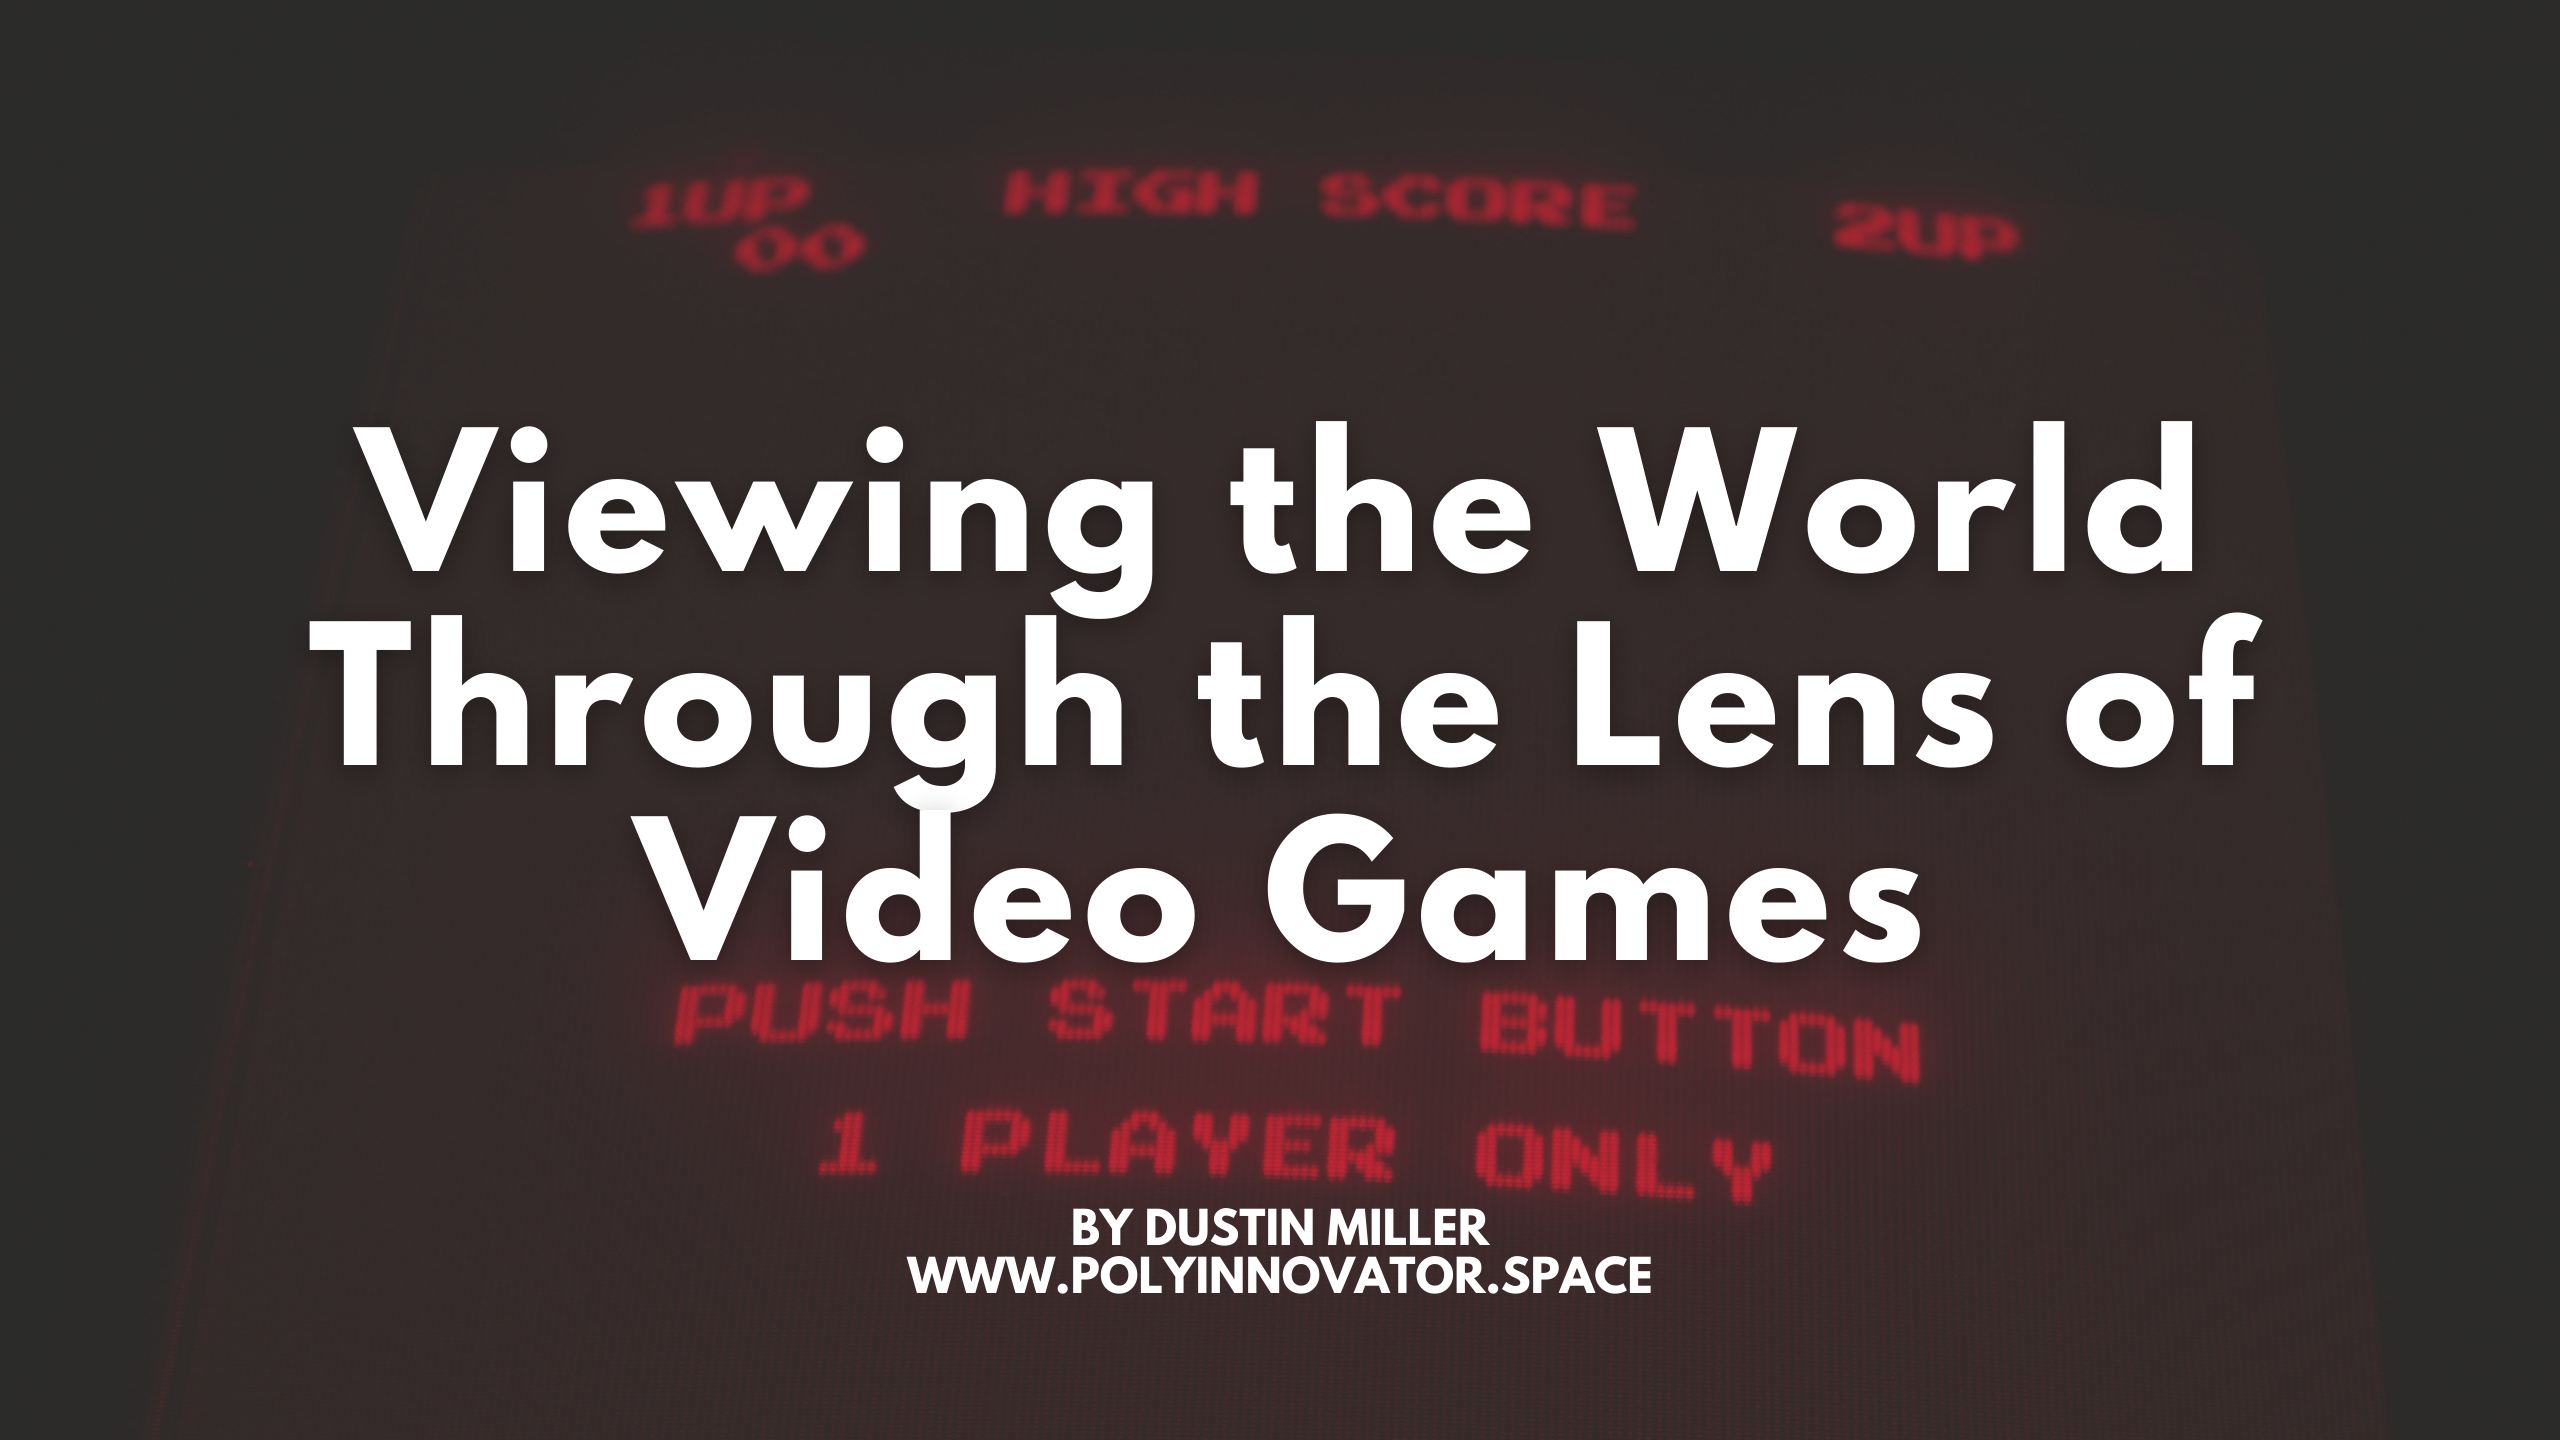 Viewing the World Through the Lens of Video Games